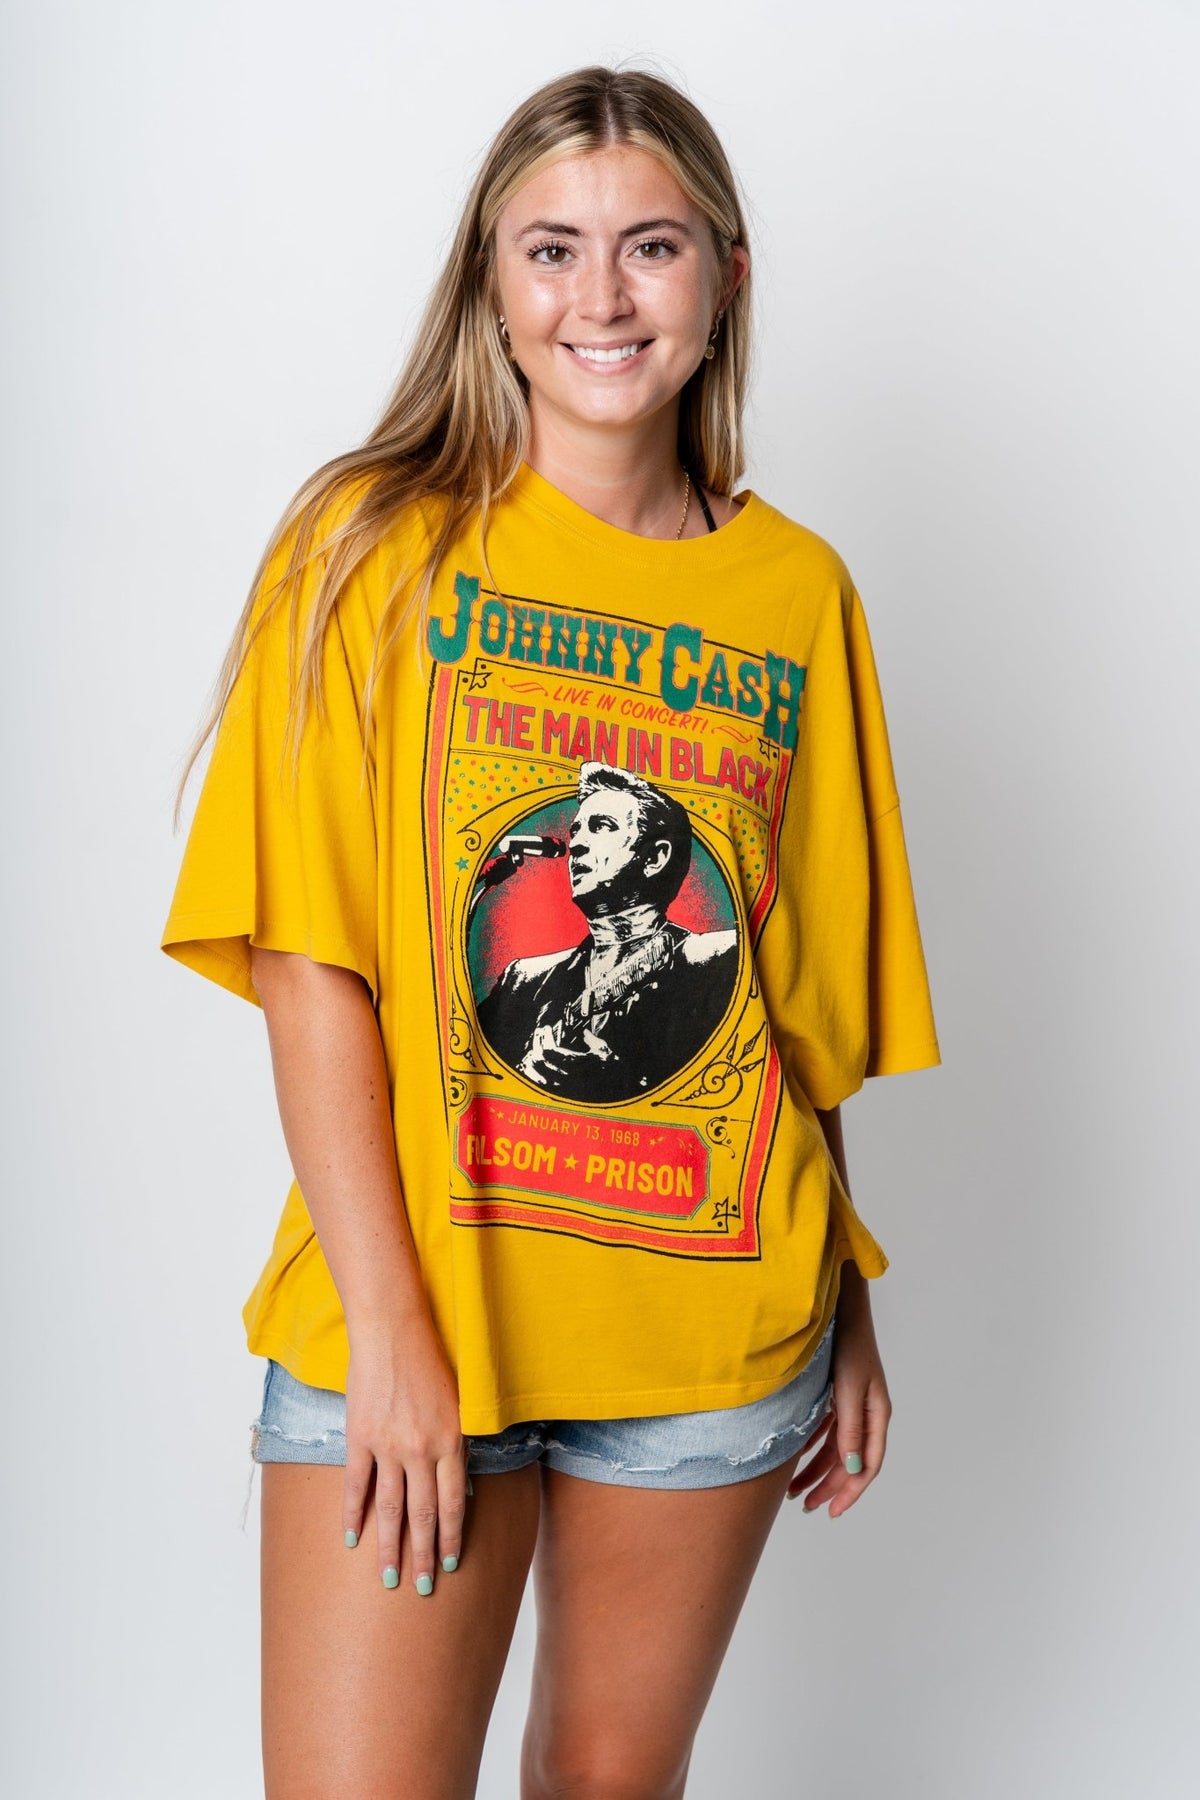 DayDreamer Johnny Cash man in black oversized tee golden daze - DayDreamer Graphic Band Tees at Lush Fashion Lounge Trendy Boutique in Oklahoma City